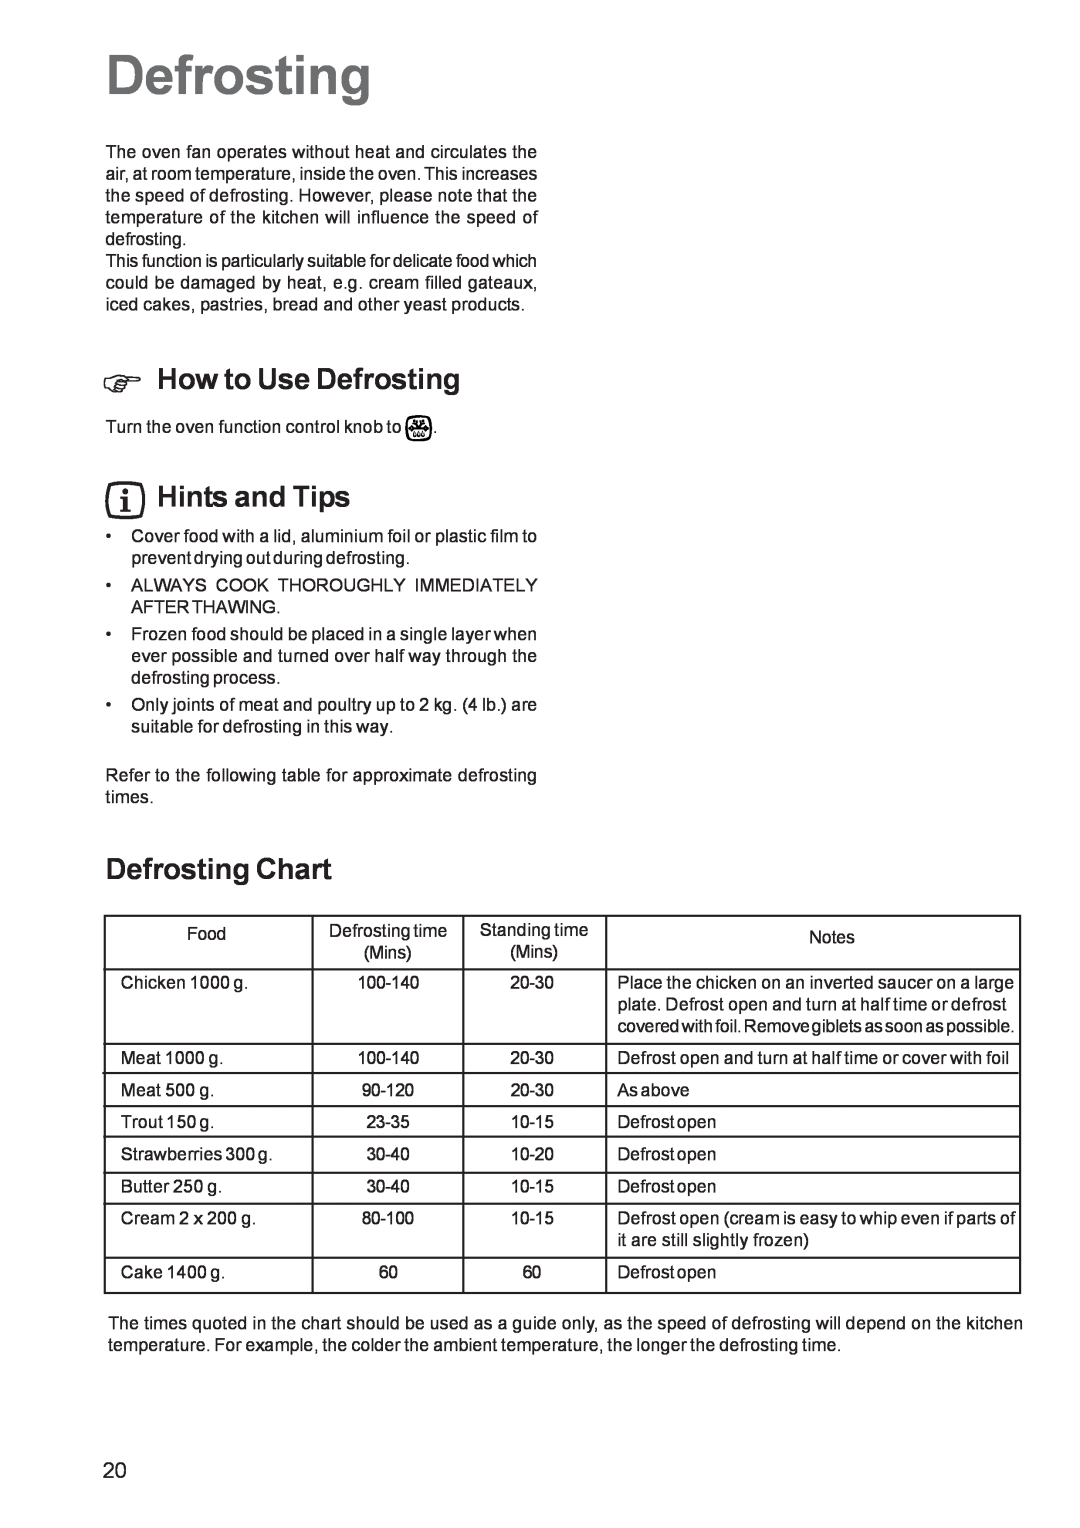 Zanussi ZCE 650, ZCE 651 manual How to Use Defrosting, Defrosting Chart, Hints and Tips 